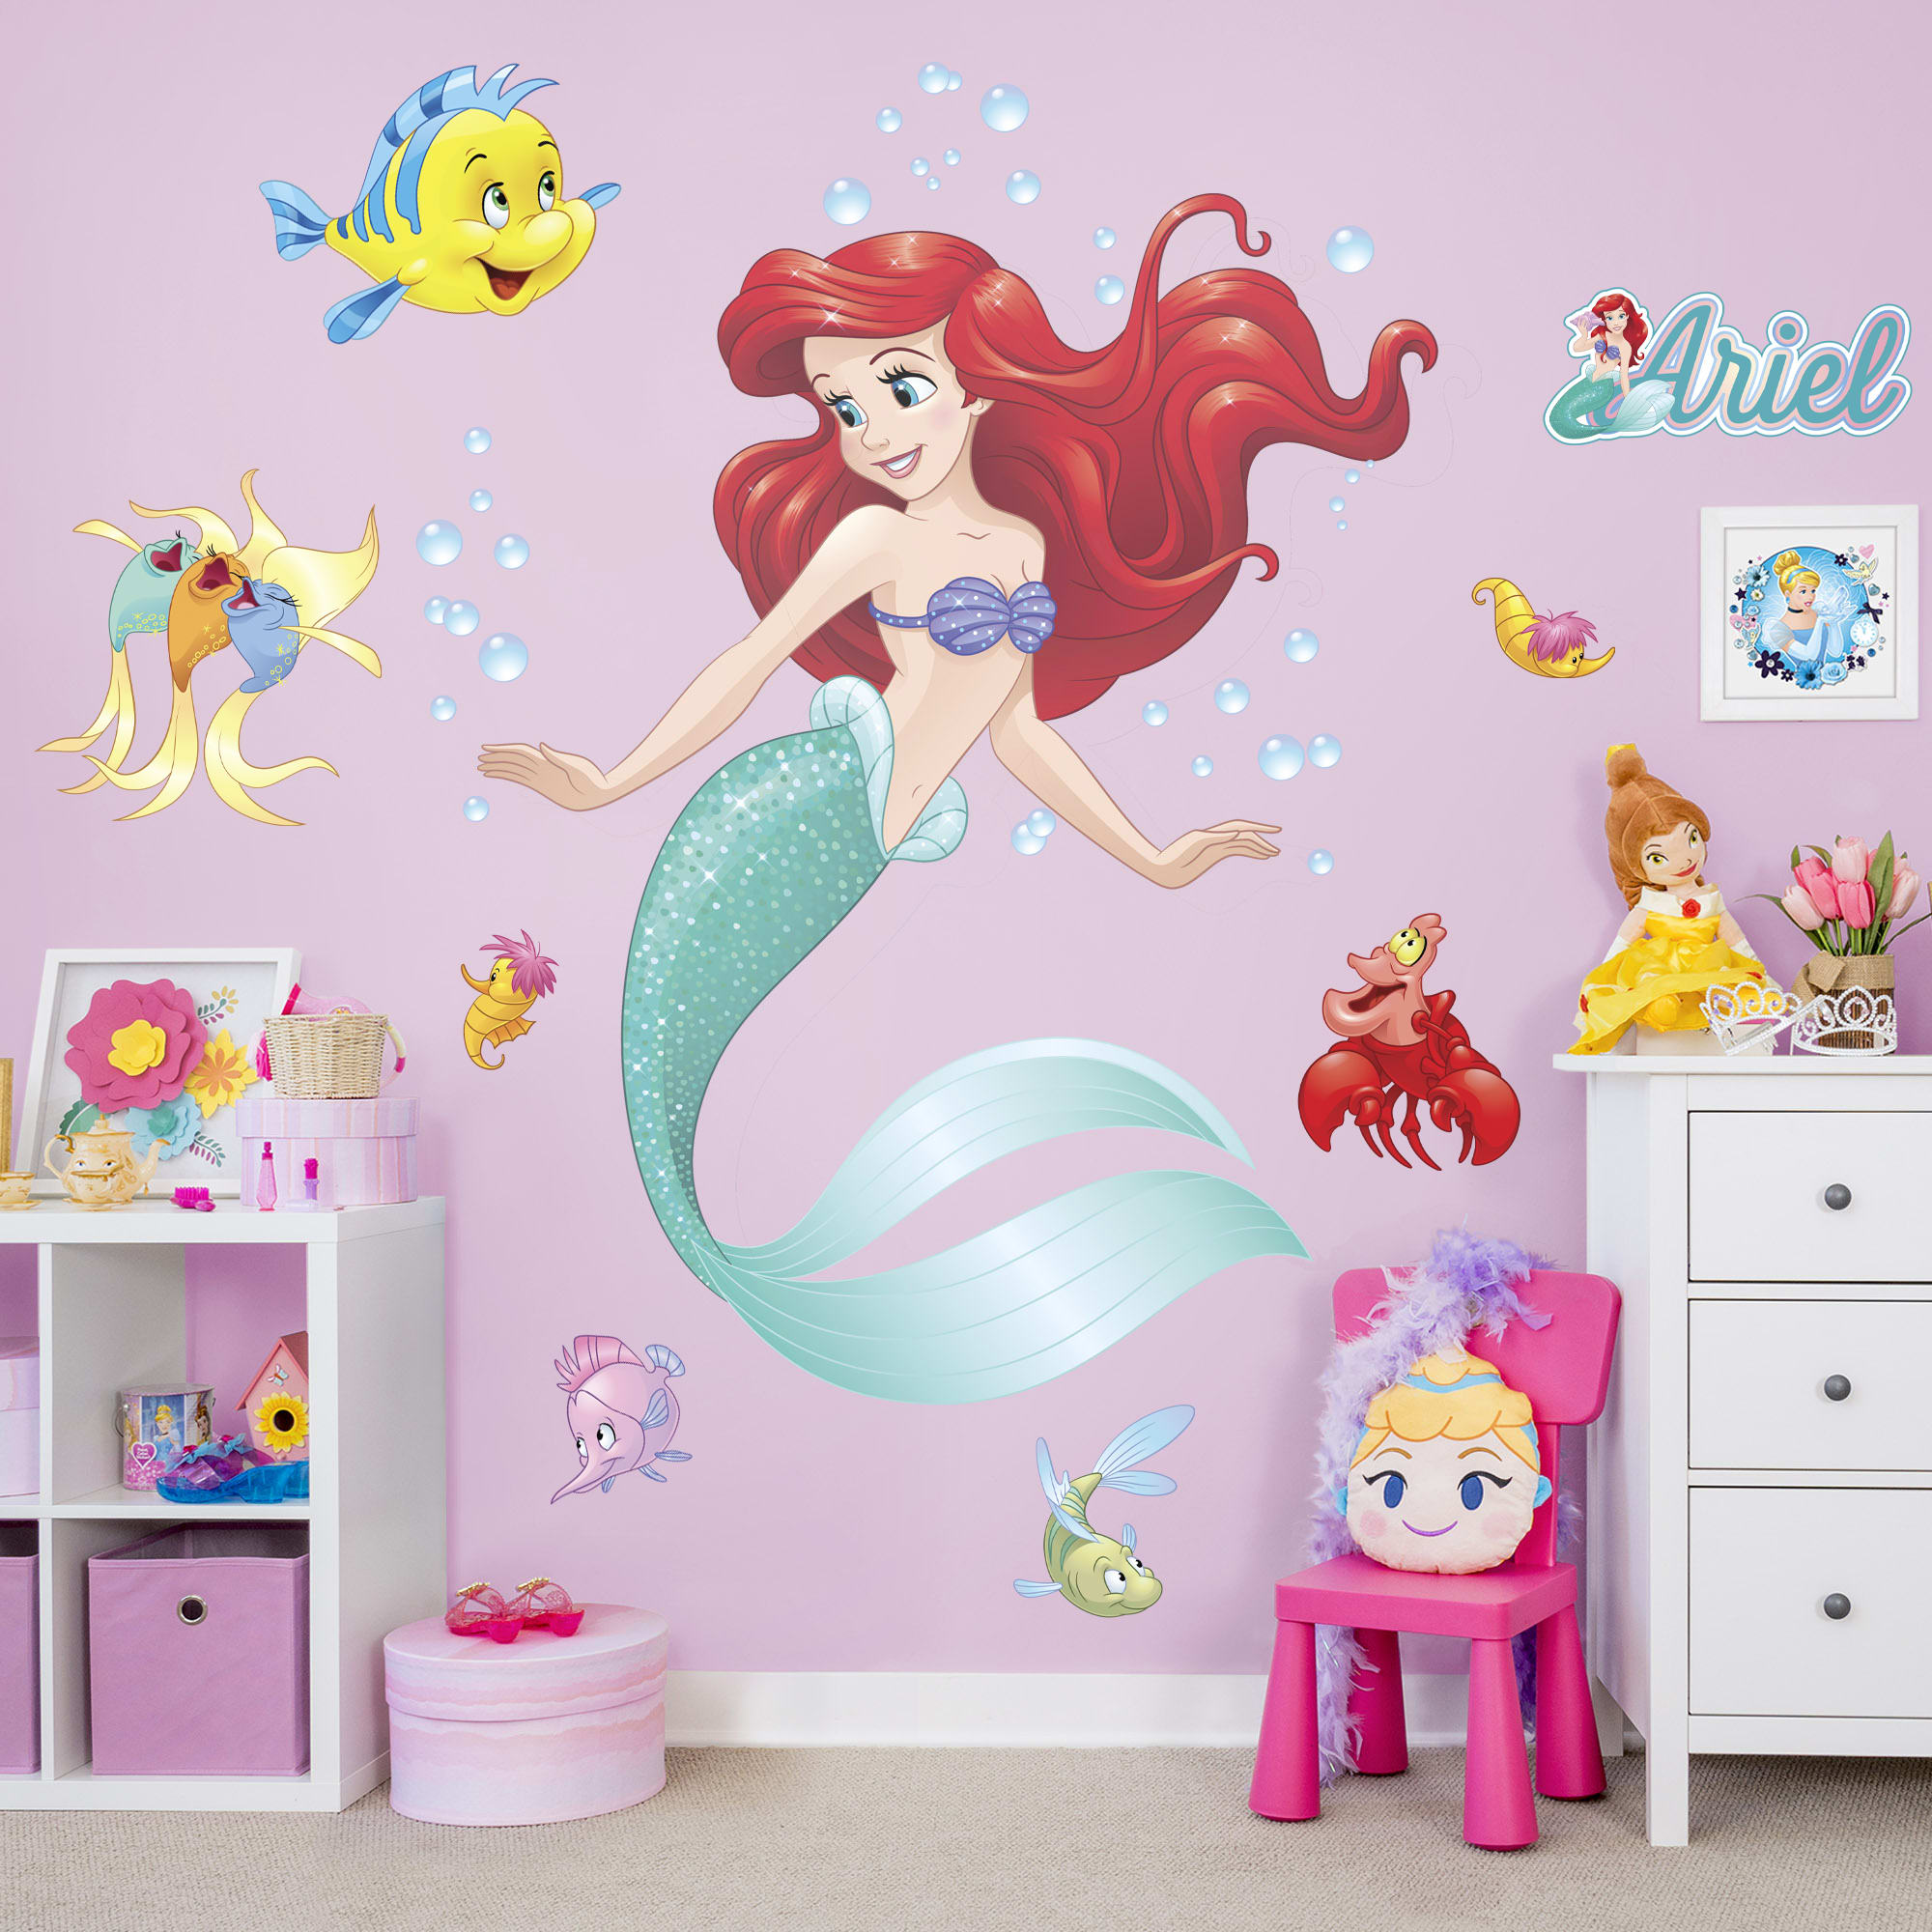 The Little Mermaid: Ariel and Friends - Officially Licensed Disney Removable Wall Decals Life-Size Character + 7 Decals (47"W x